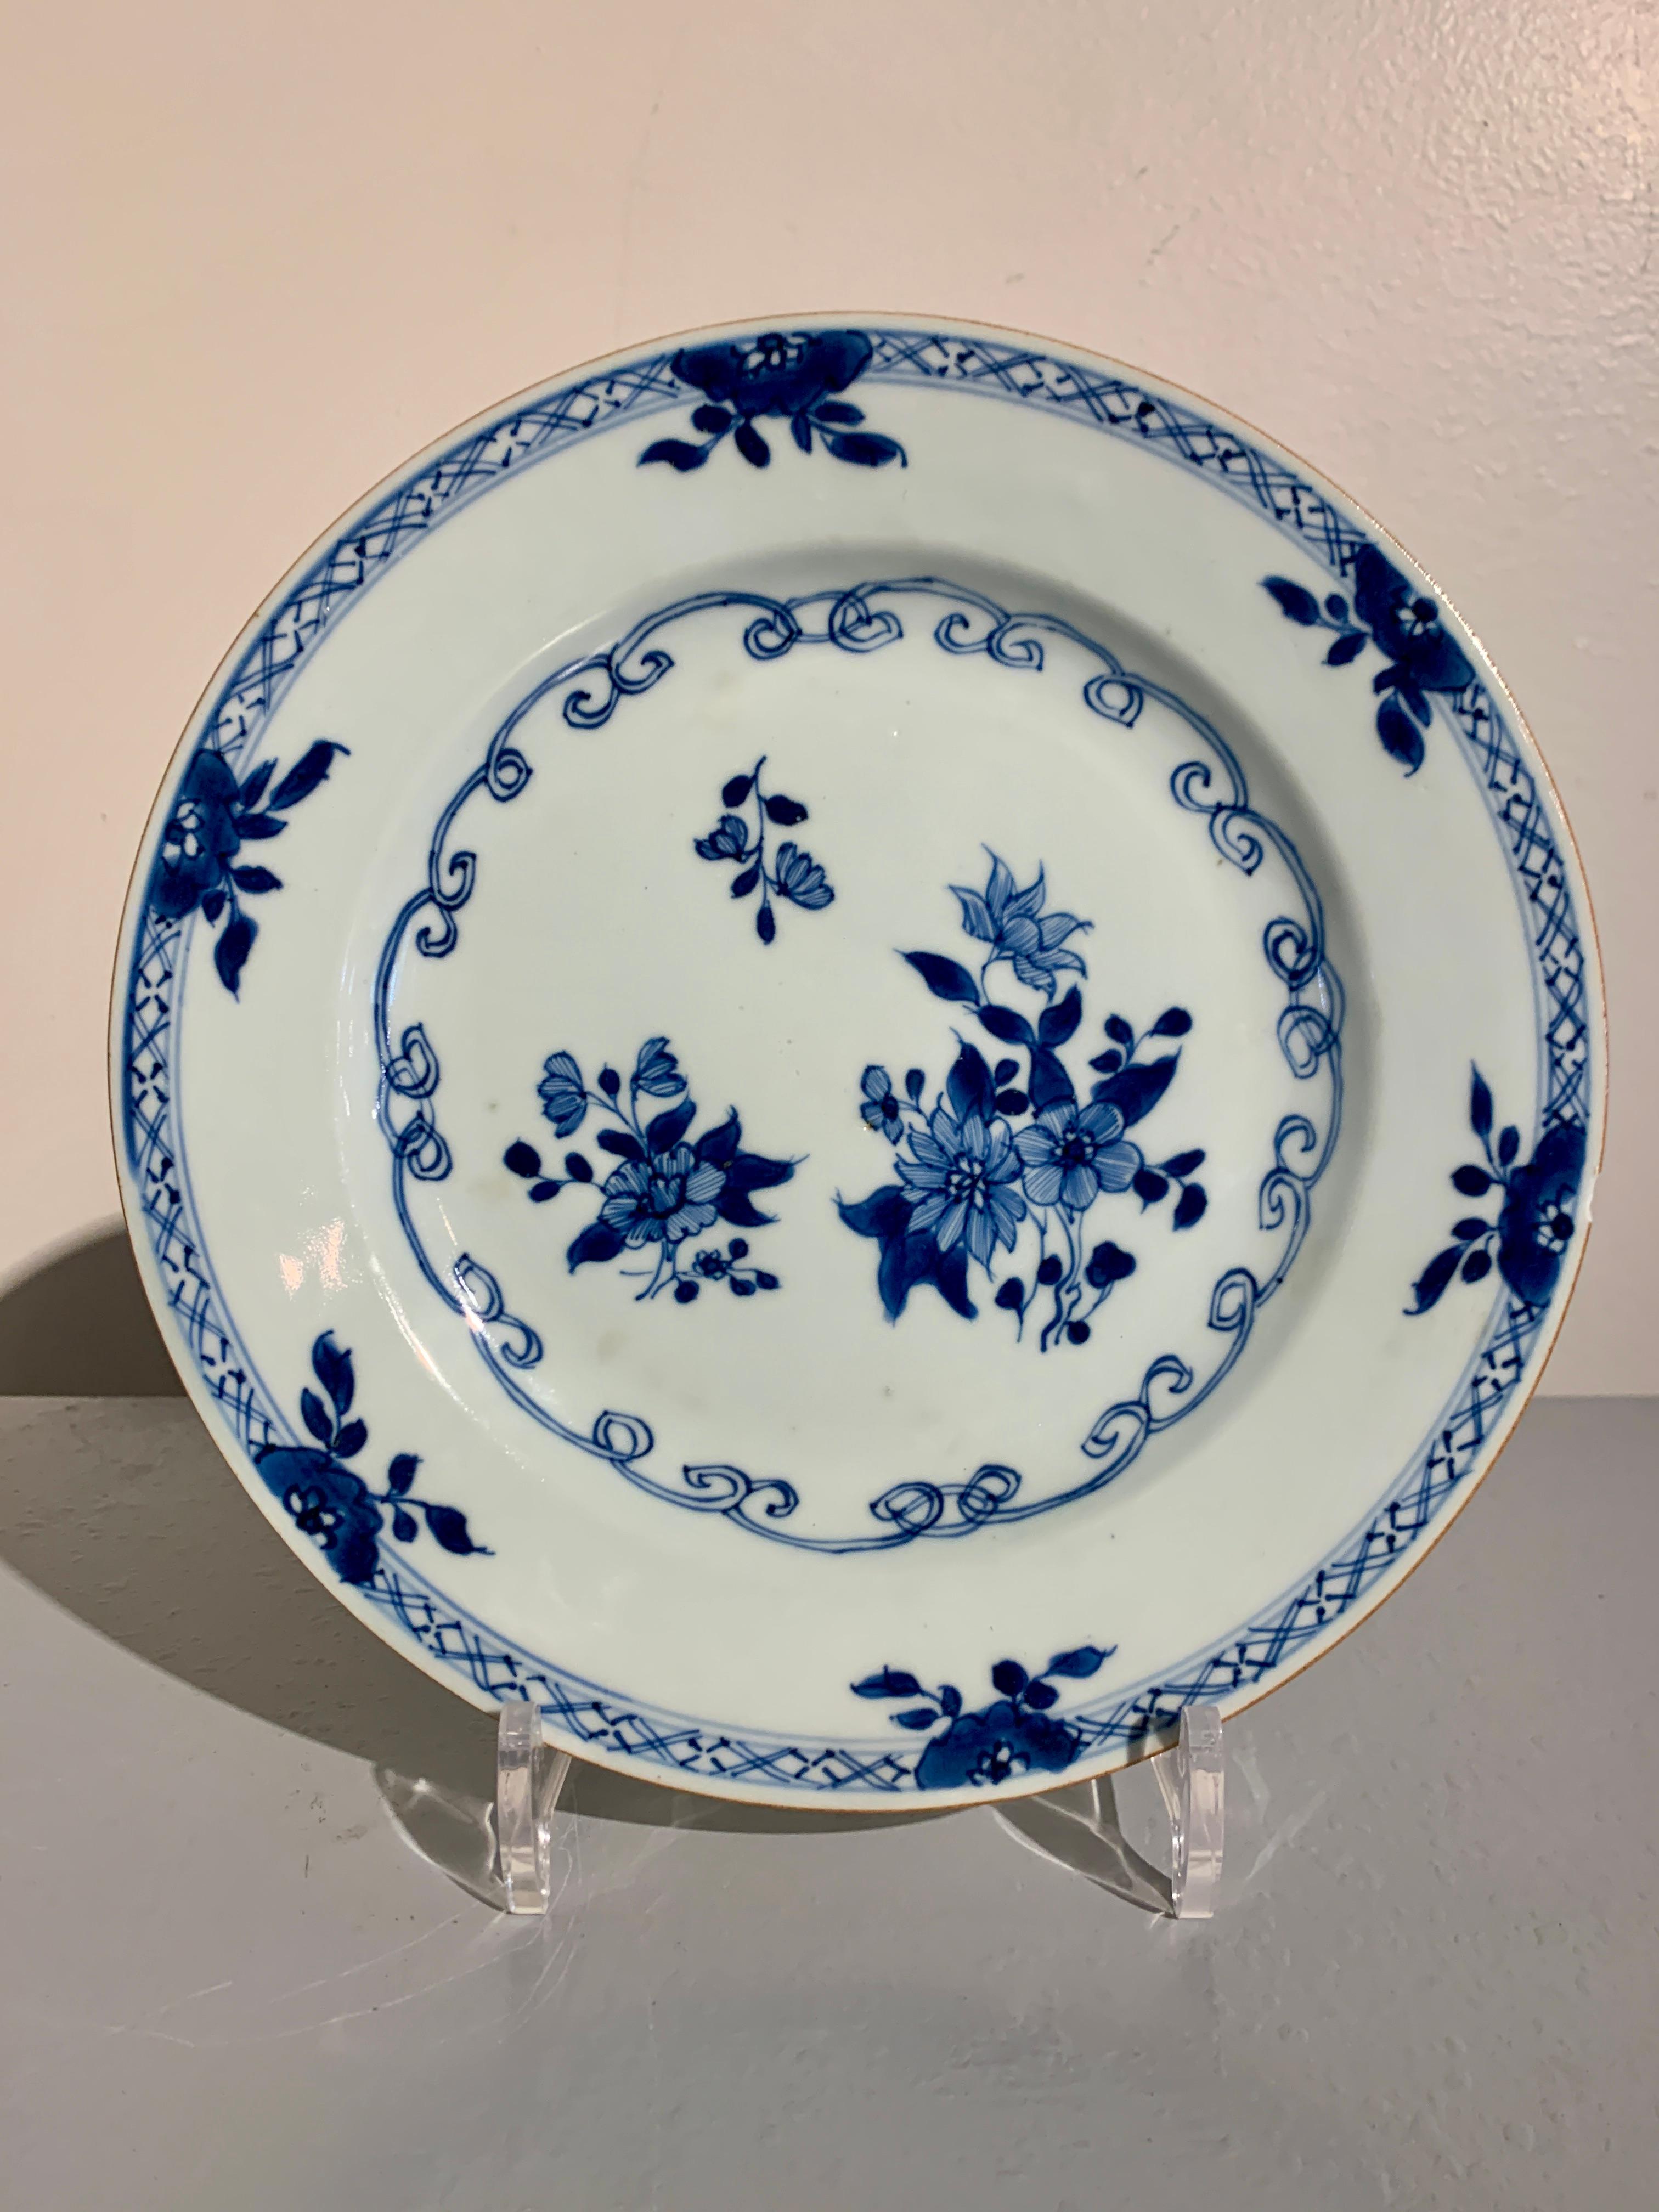 A lovely set of ten (10) Chinese export blue and white porcelain plates, Qing Dynasty, late 18th century, China.

The plates measuring 9